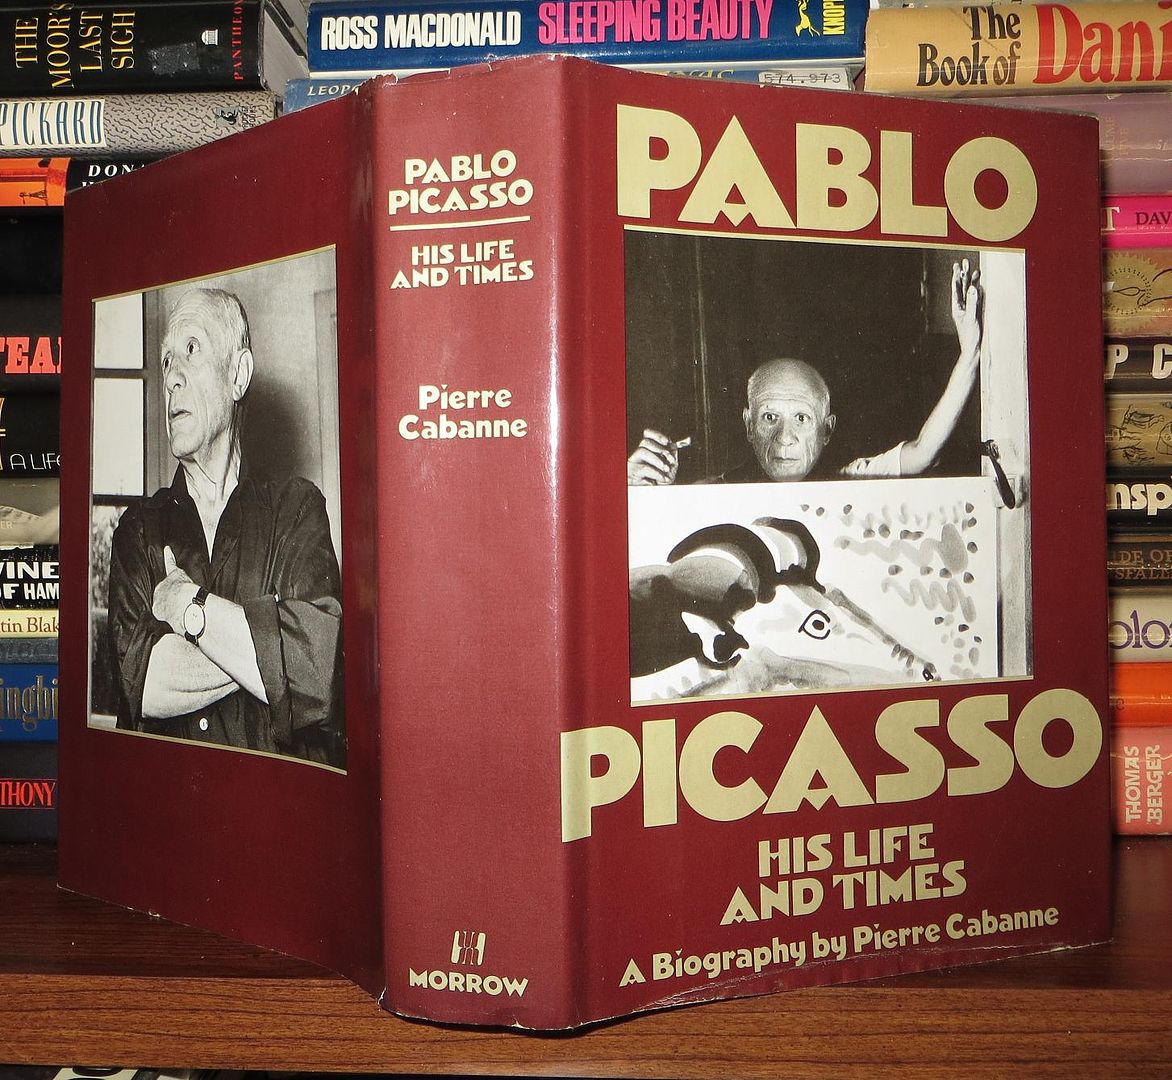 CABANNE, PIERRE - PABLO PICASSO - Pablo Picasso His Life and Times